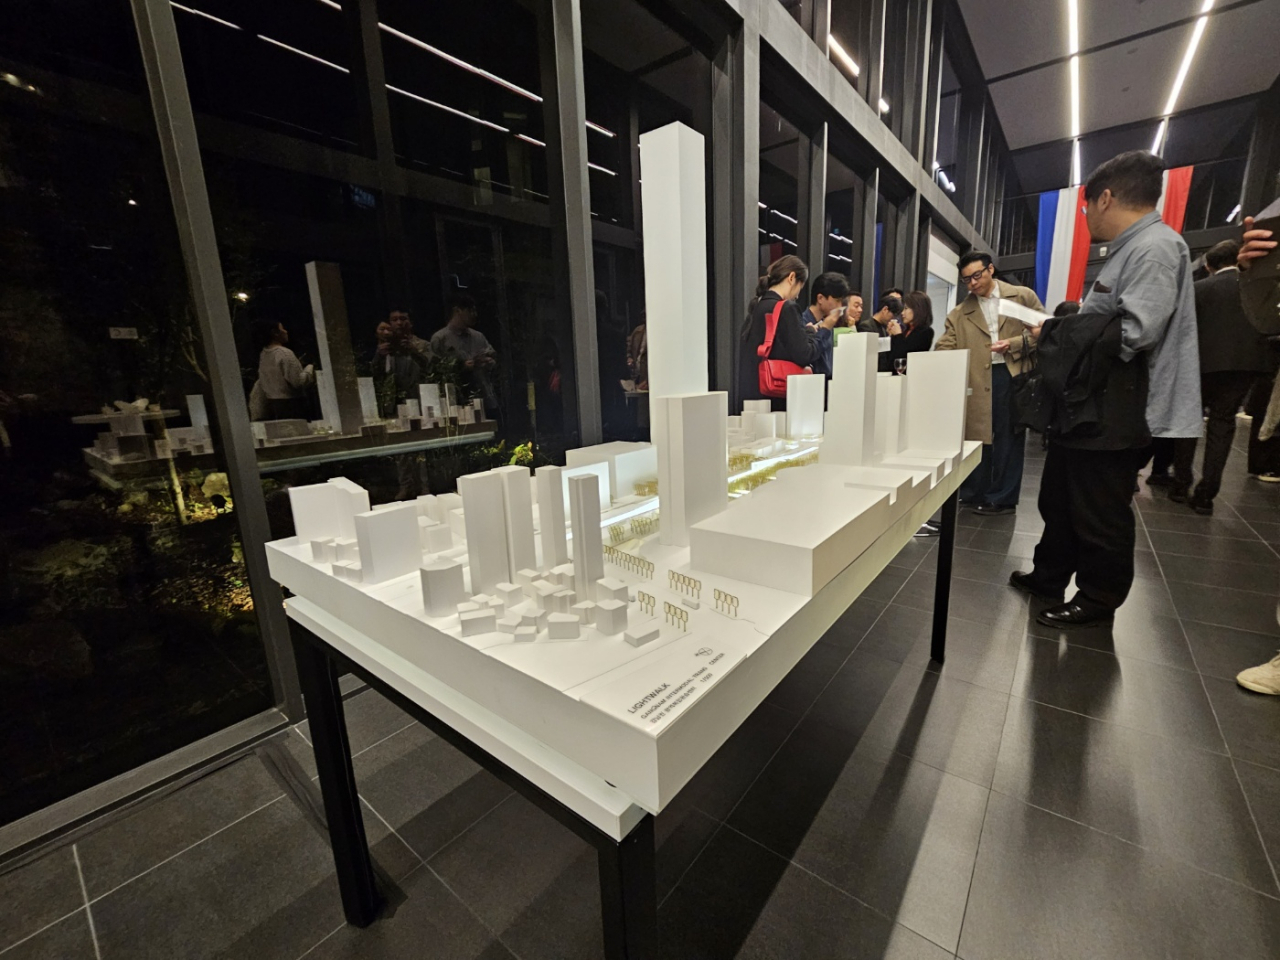 Visitors take a look at a architectural design model of the Lightwalk project on Thursday at the French Embassy in Seoul. (Park Yuna/The Korea Herald)